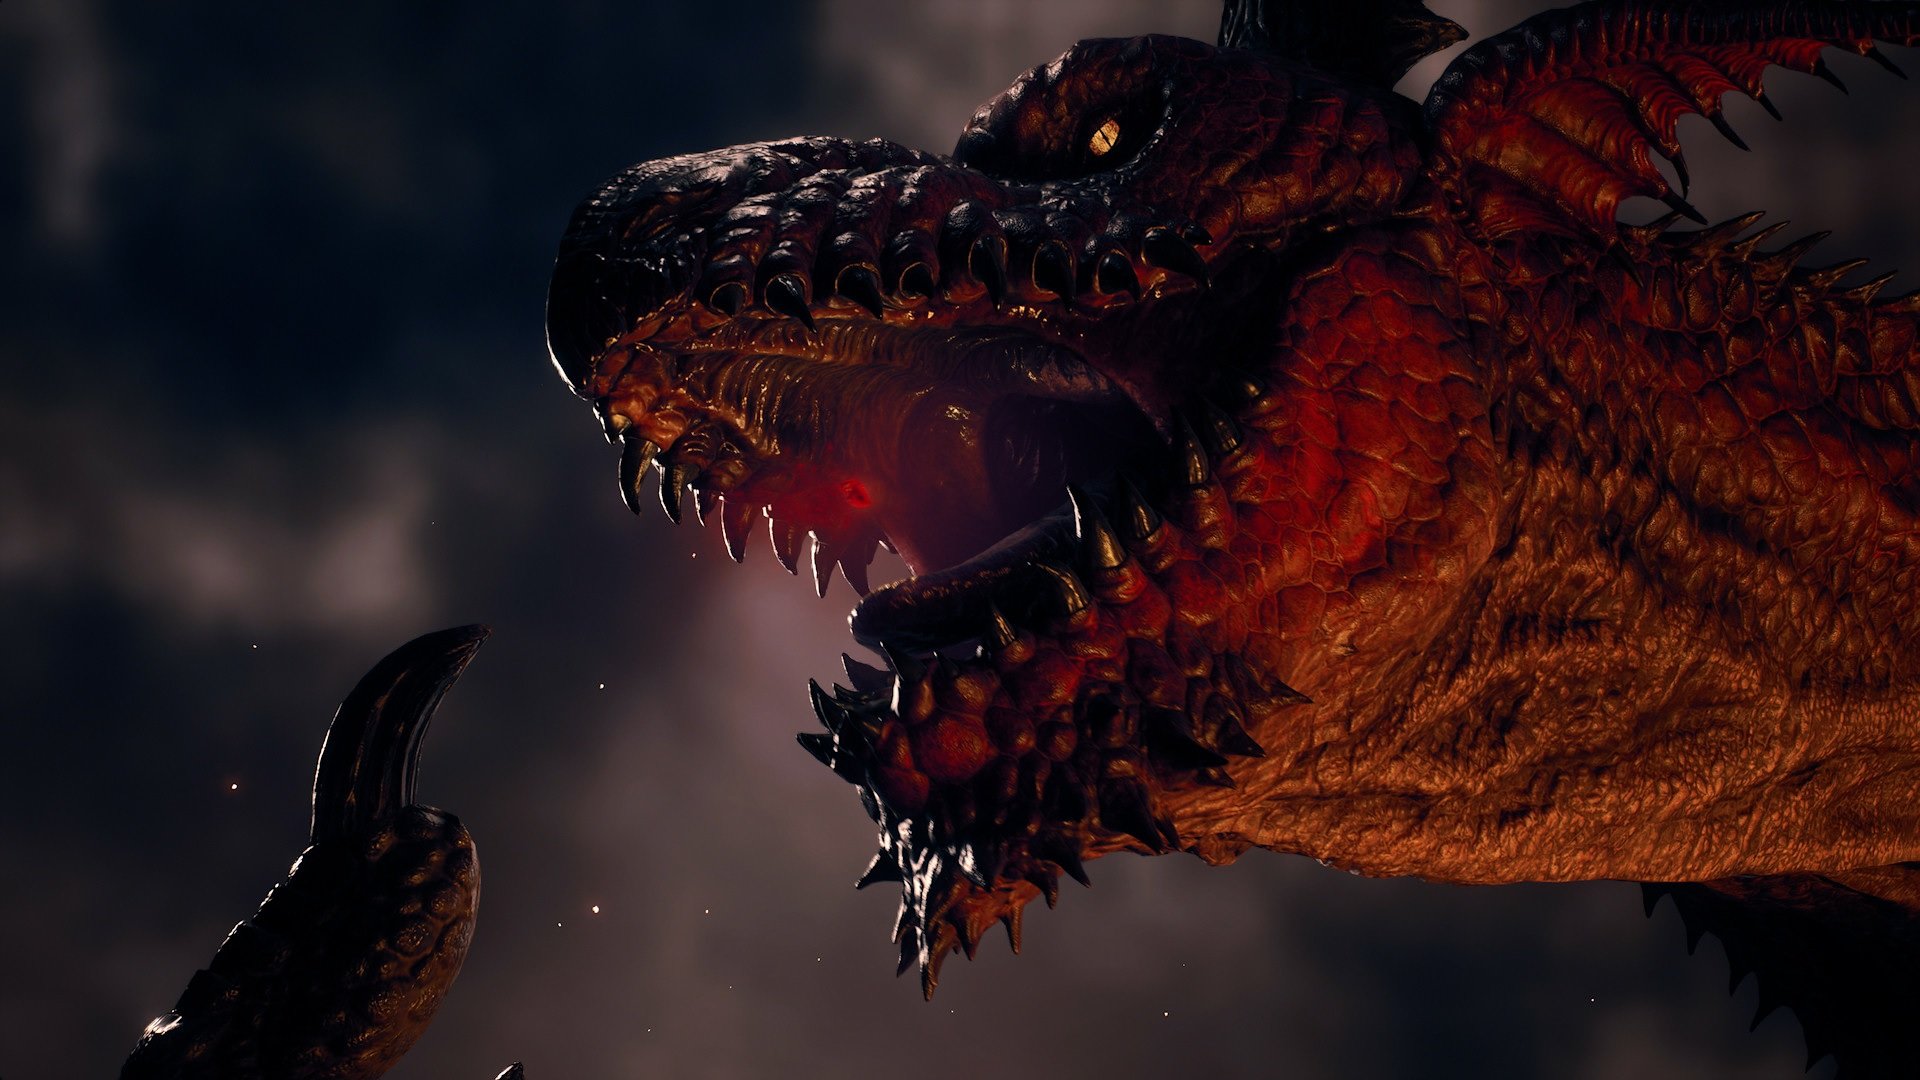 Revealing Lots of Details, Here's Gameplay Footage of Dragon's Dogma 2!